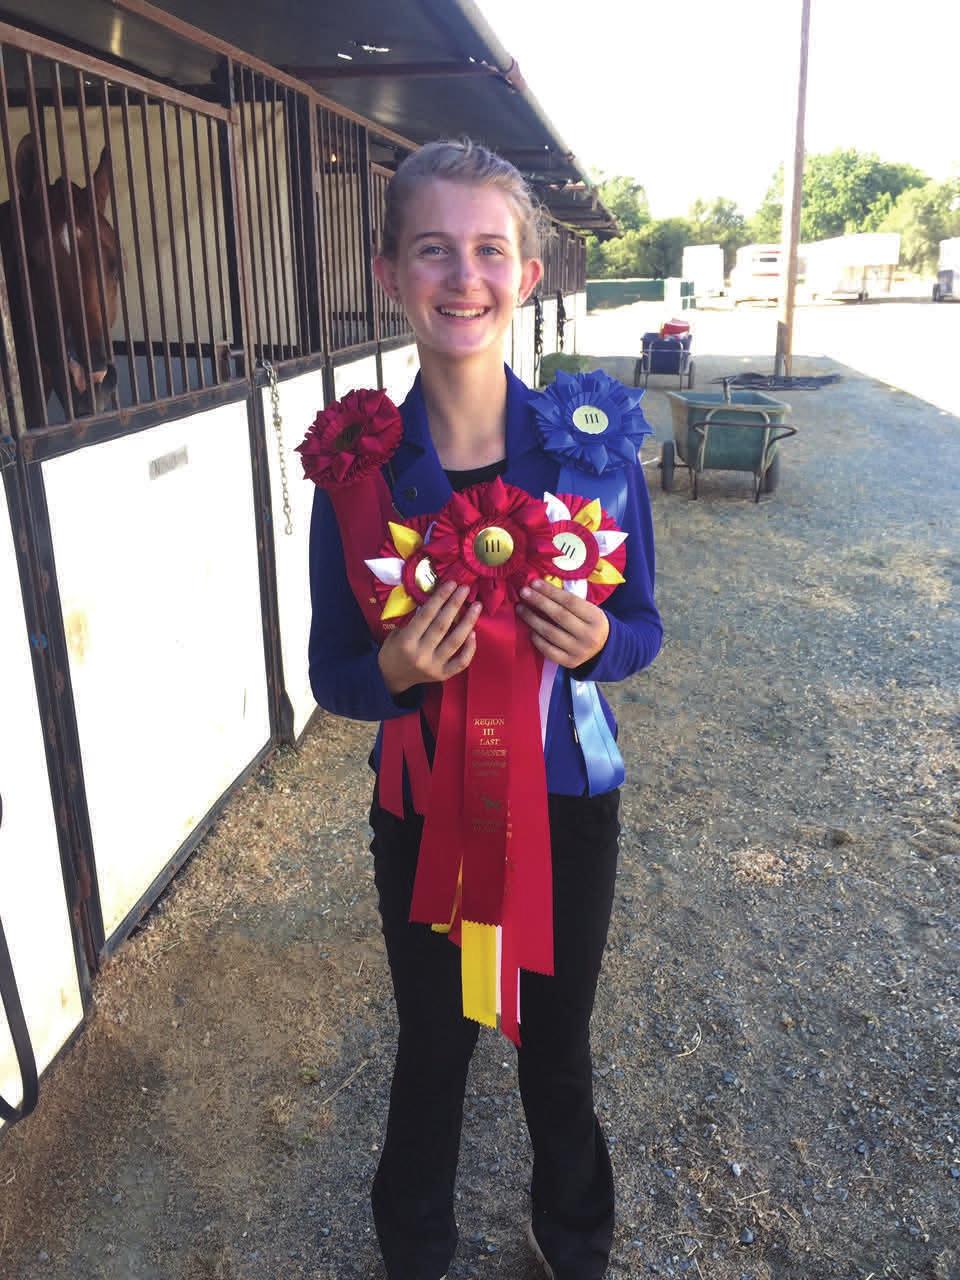 PAGE 2 RANCHO CALIFORNIA VOLUME 1, ISSUE 8 BRAGGING RIGHTS Geri and Jim Gnuse would like to recognize Kira Garrett for her outstanding showing at Region 3 Arabian Championships in Rancho Murieta this